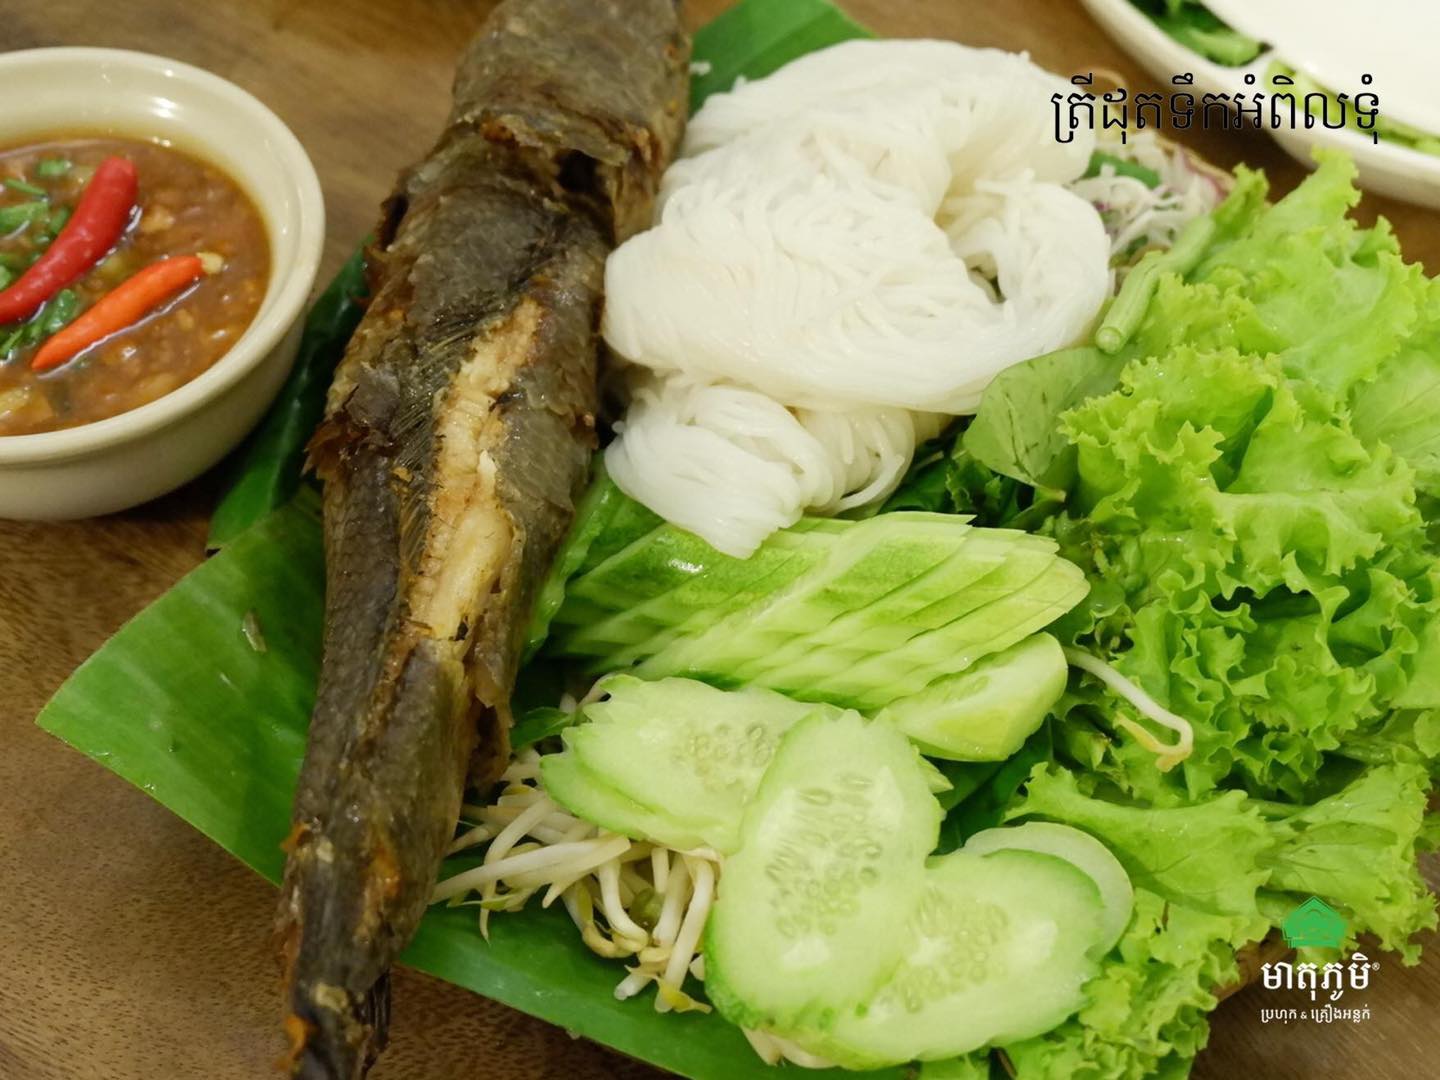 25.Baked Fish with Sweet Tamarind Sauce